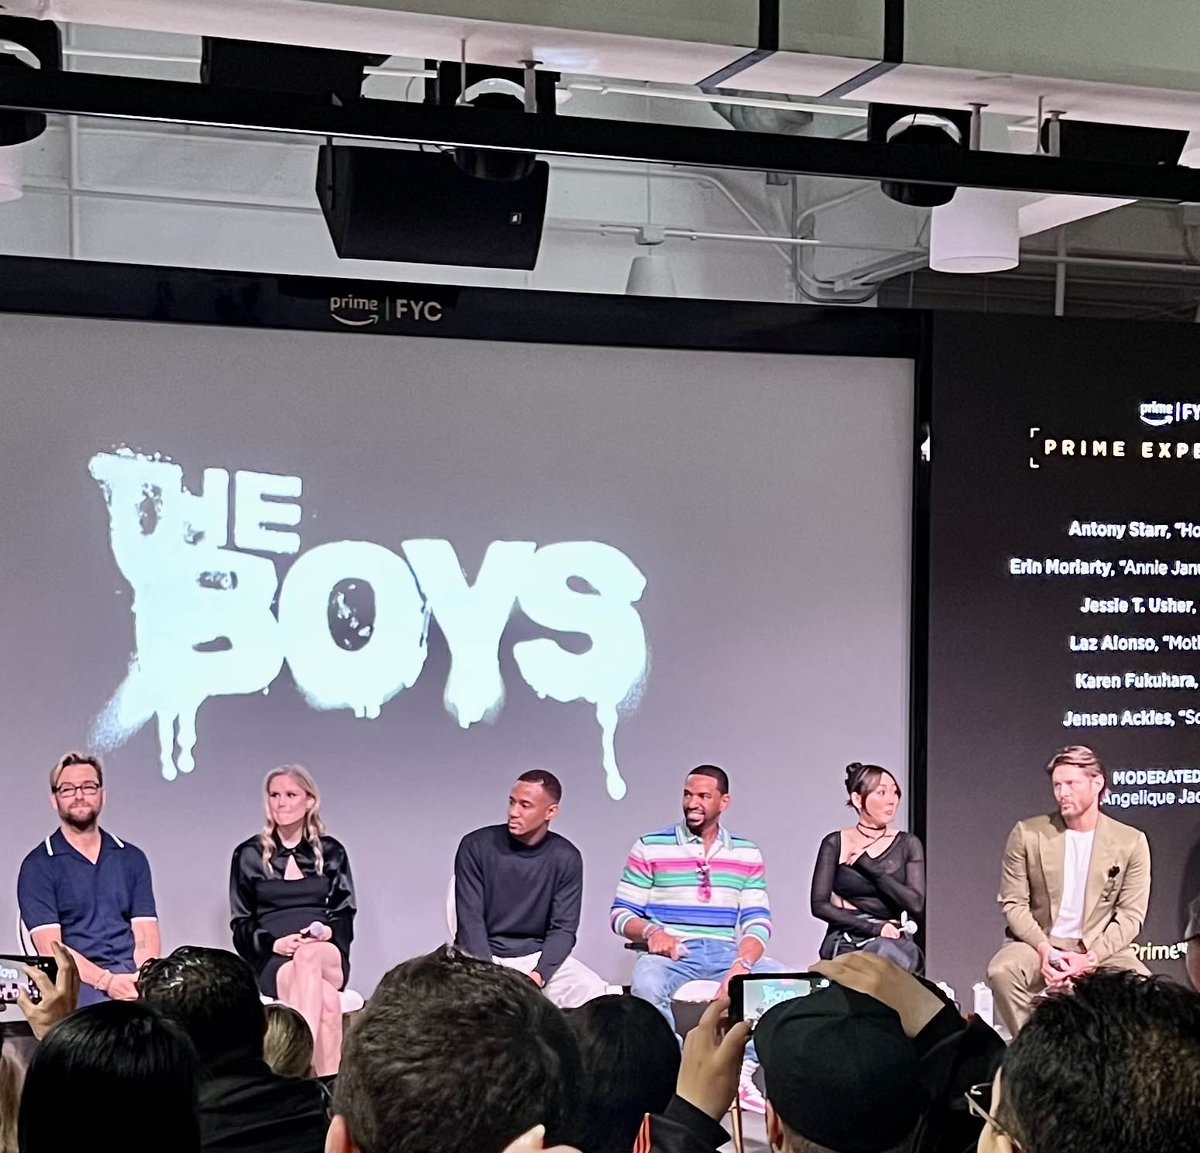 Lucky to attend @TheBoys FYC event and saw Herogasm on the big screen. Yeah that was traumatic. ♥️ @antonystarr @JensenAckles #starlight @The_JessieT #lazalonso @KarenFukuhara #primerfyc #herogasm